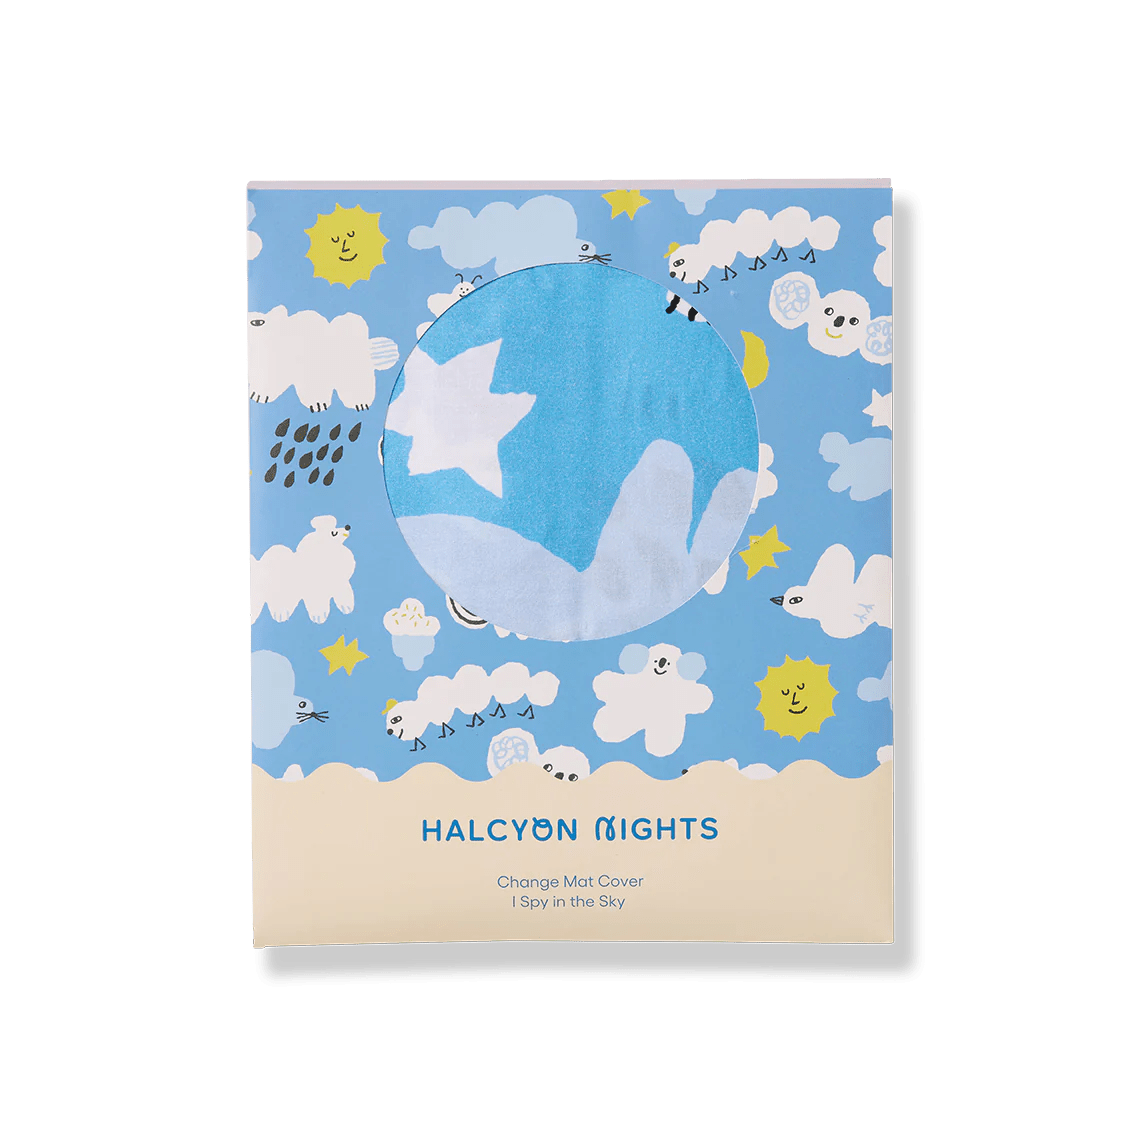 HALCYON NIGHTS I Spy In The Sky Change Mat Cover - Preston ApothecaryHALCYON NIGHTS